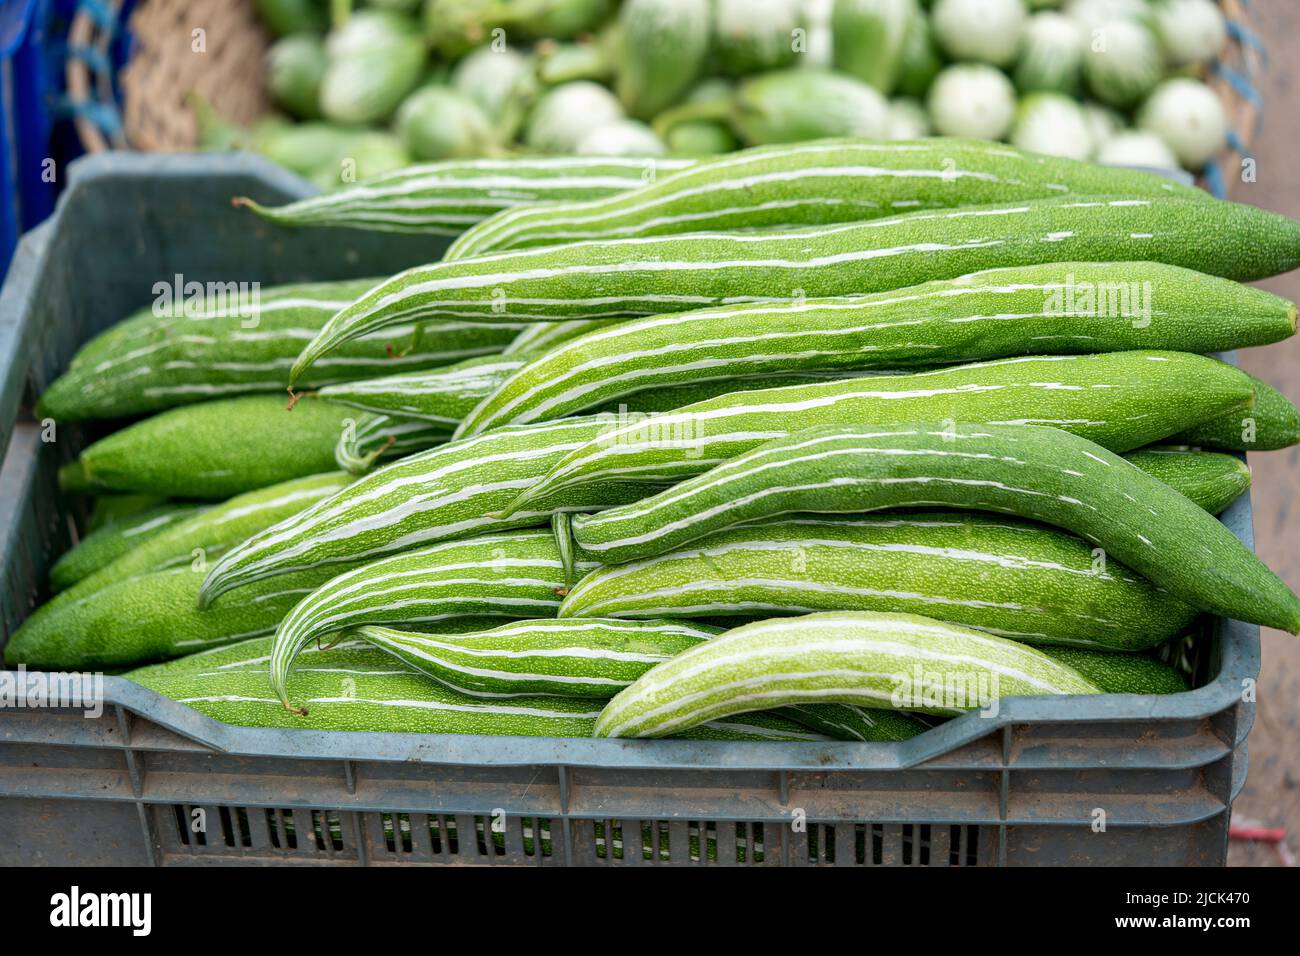 Cucumber round and long, in market Stock Photo